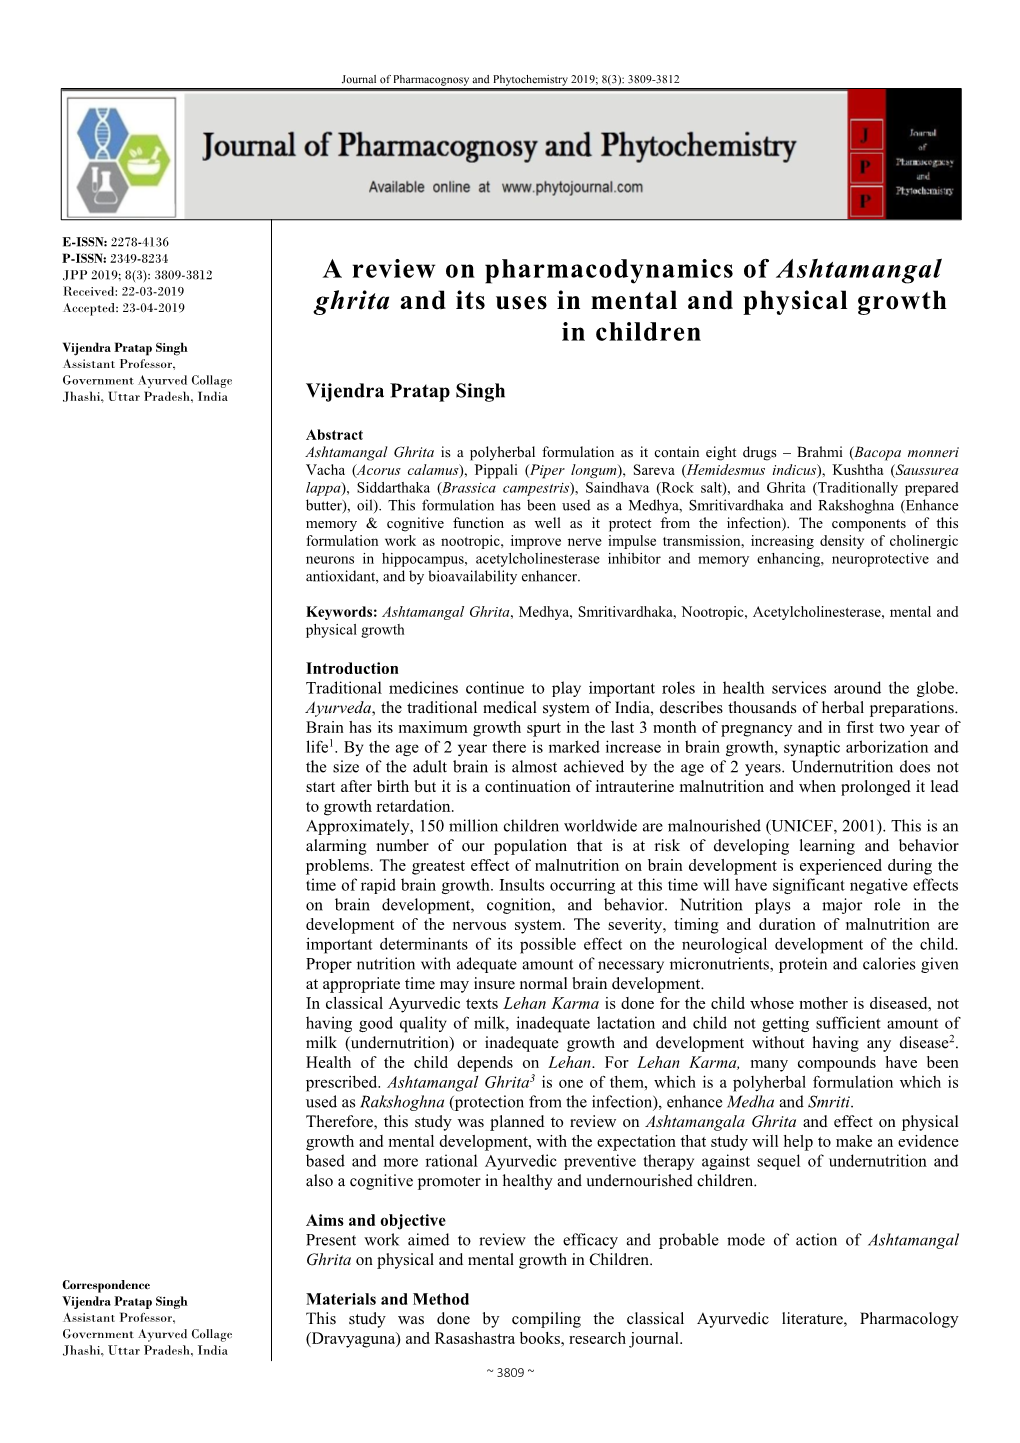 A Review on Pharmacodynamics of Ashtamangal Ghrita and Its Uses In